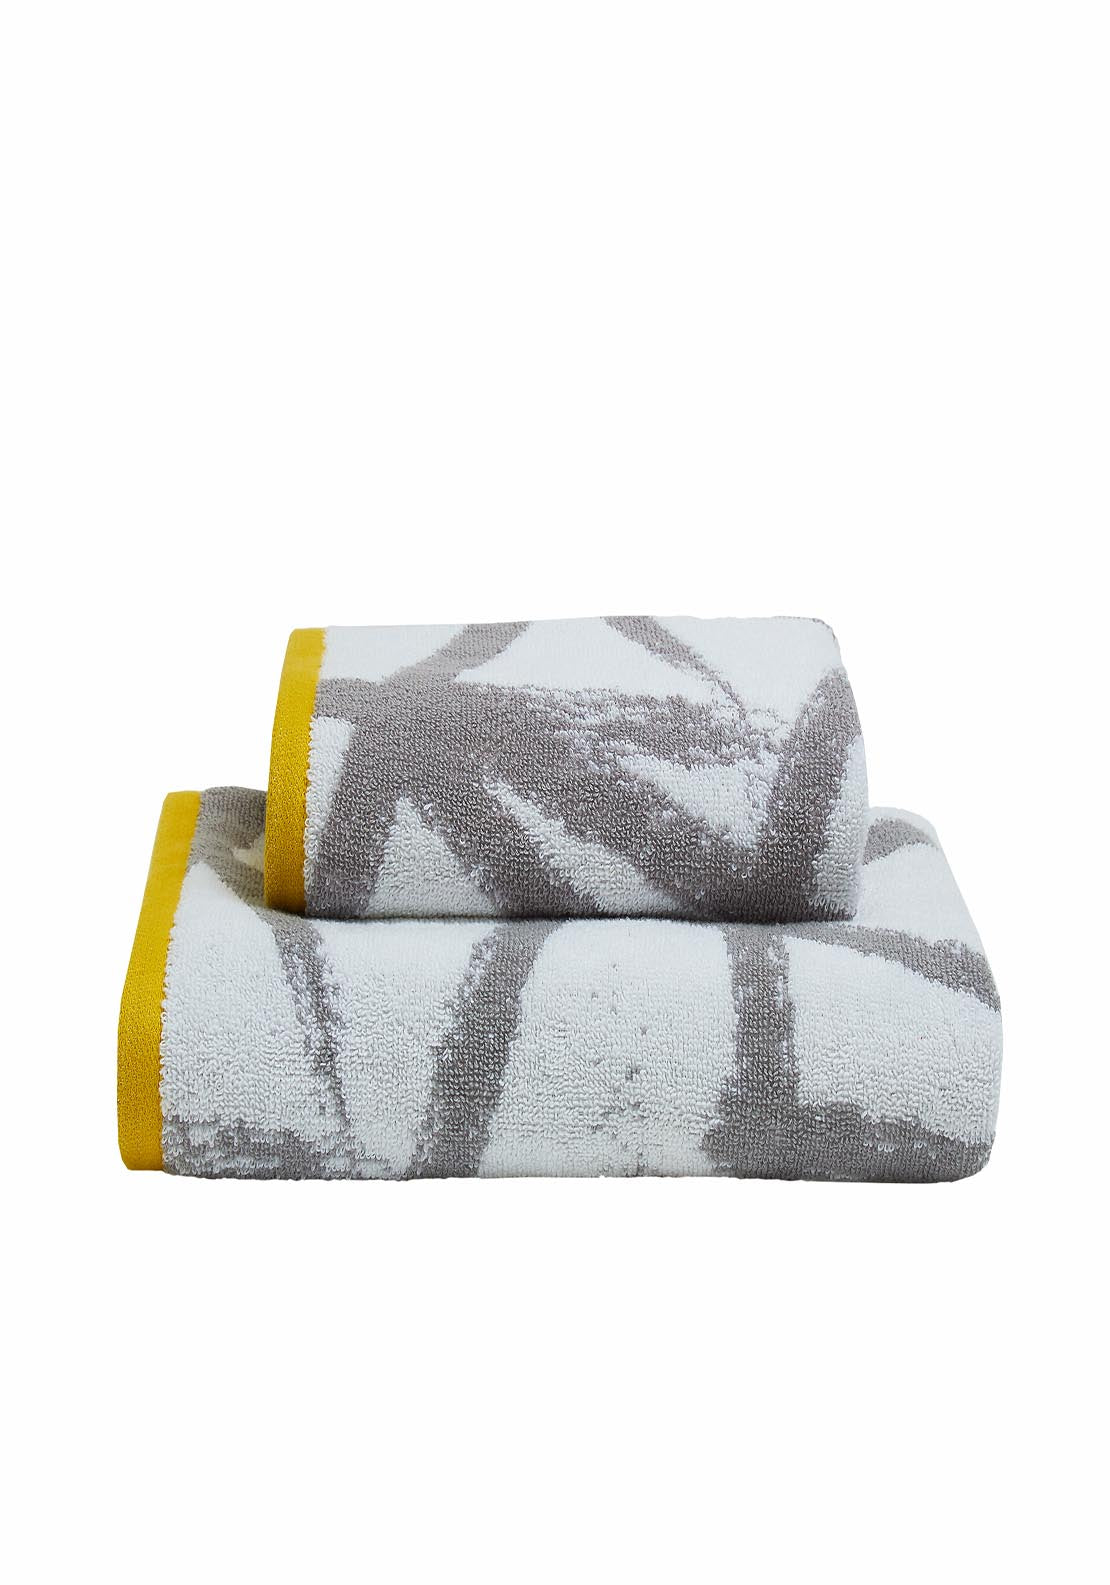 The Home Collection Leda Hand Towel - Grey &amp; Ochre - Grey / Ochre 3 Shaws Department Stores